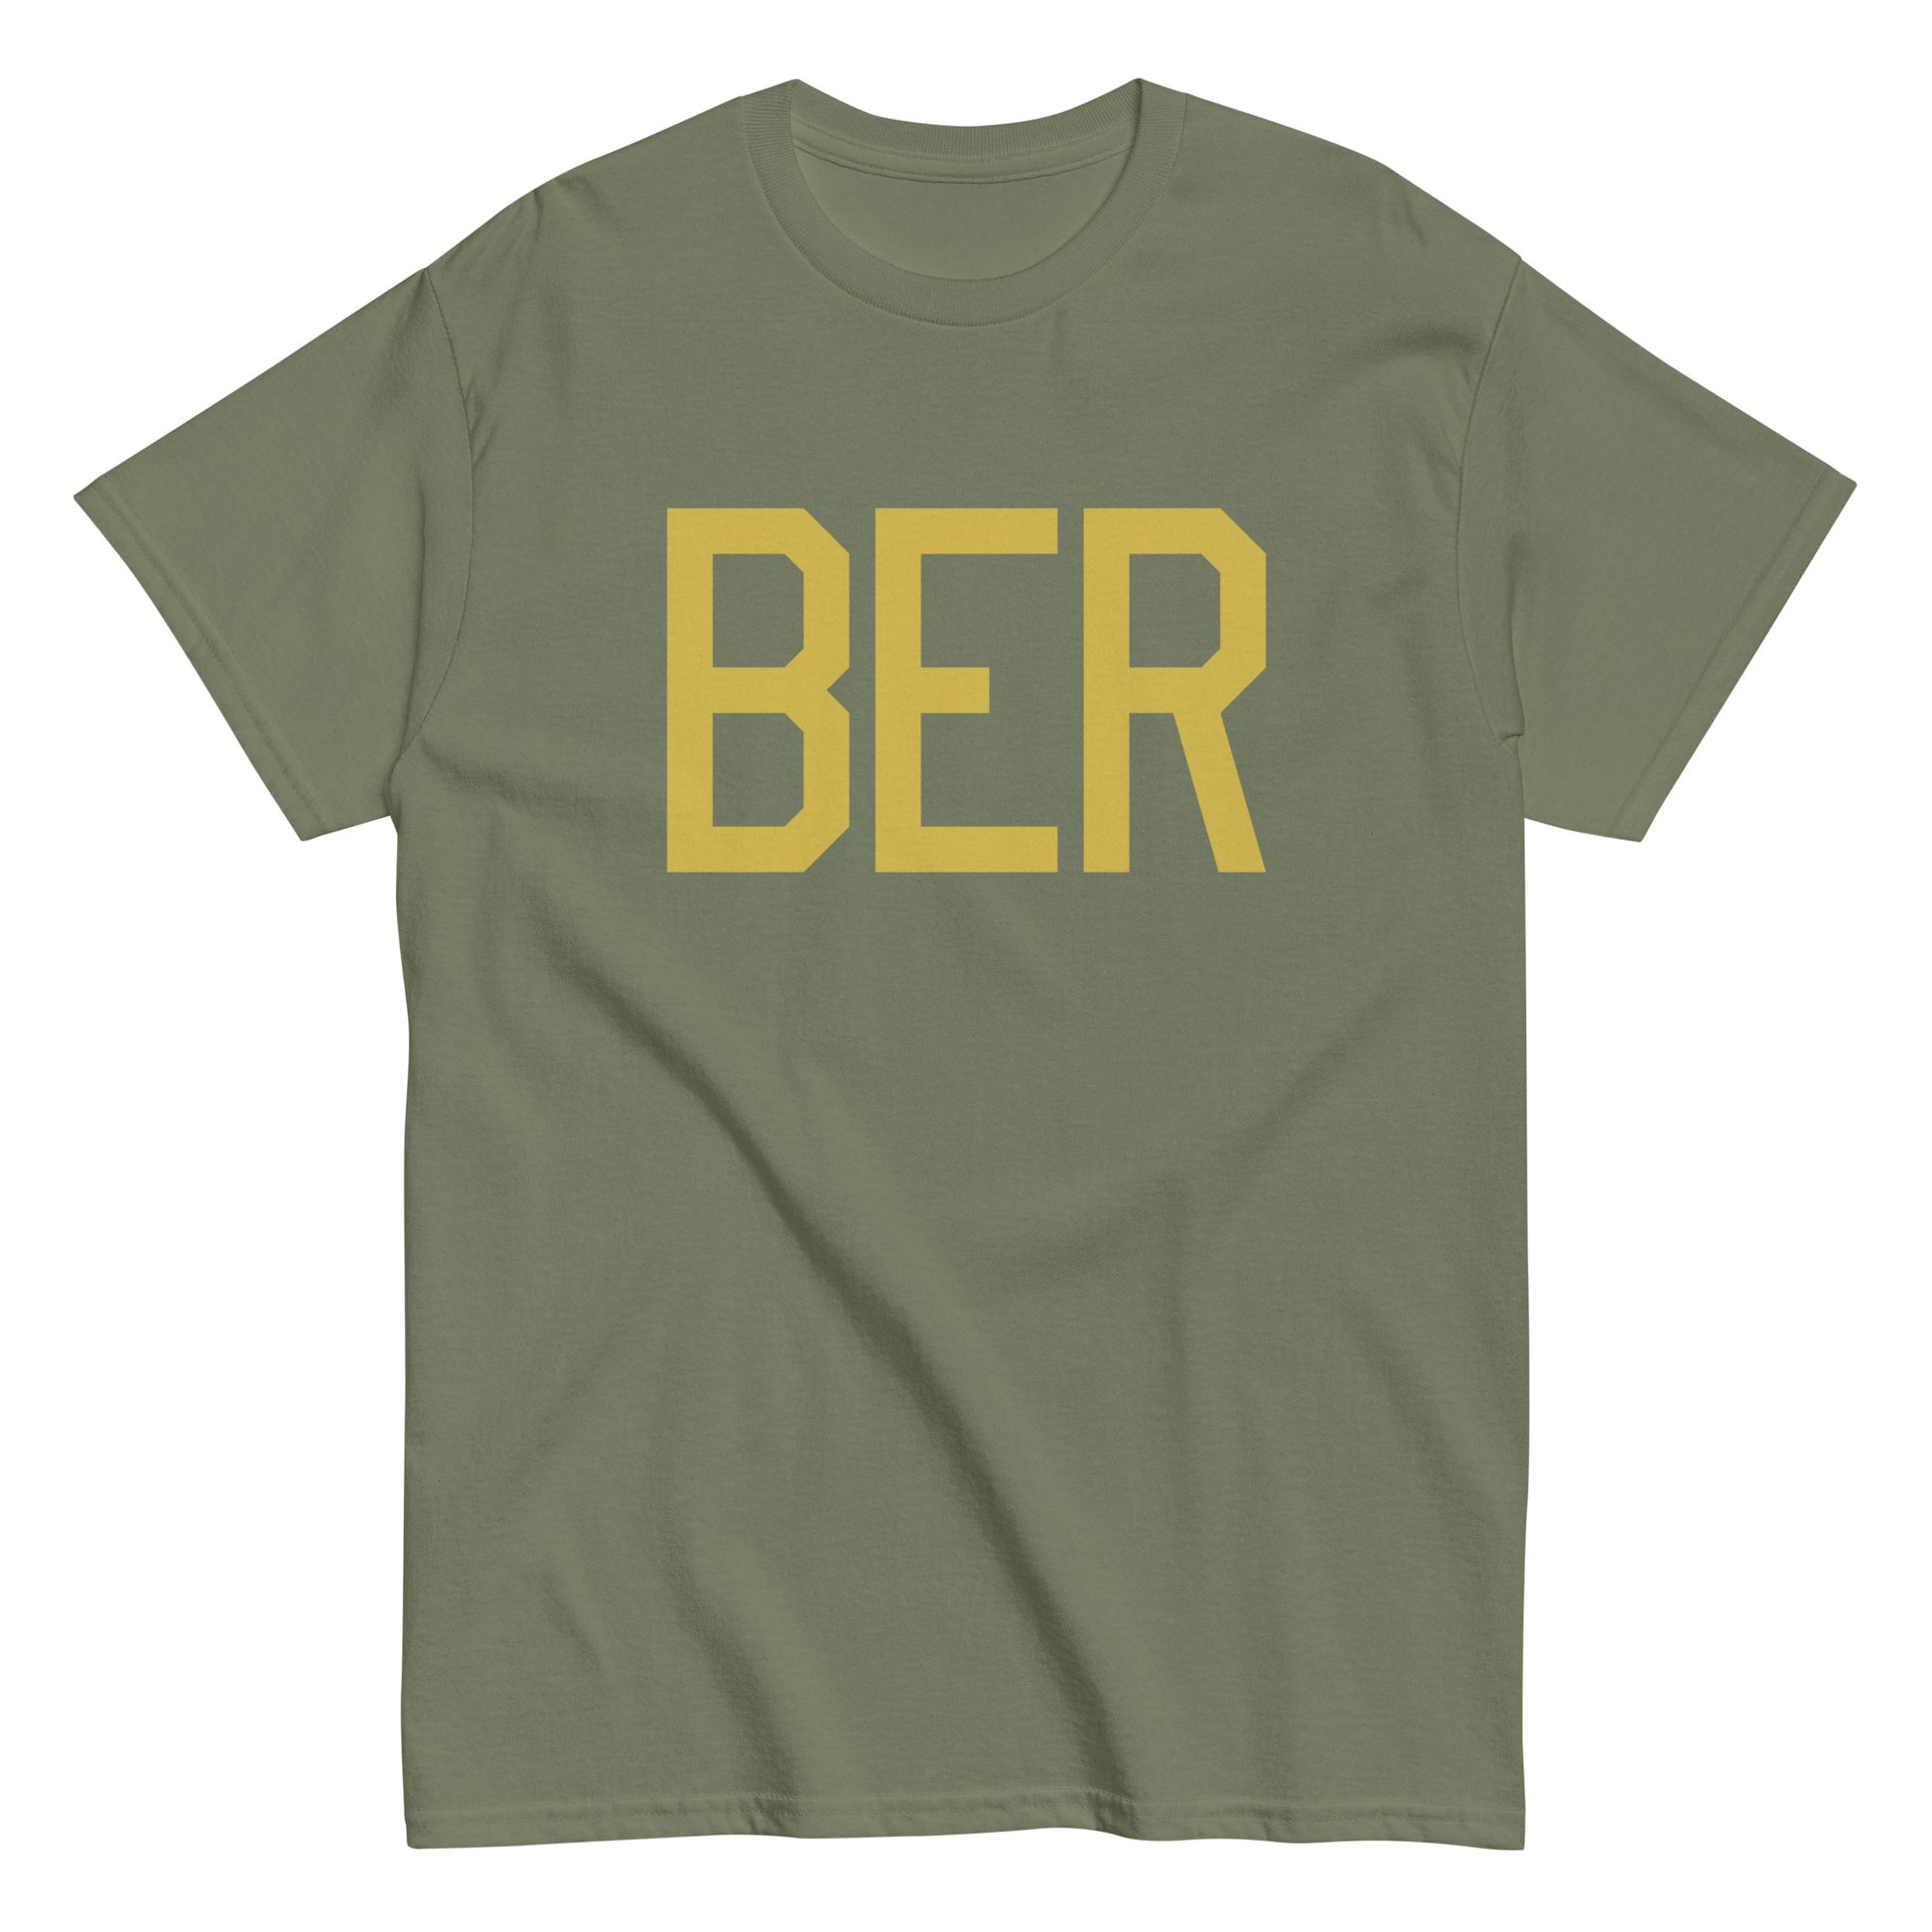 Aviation Enthusiast Men's Tee - Old Gold Graphic • BER Berlin • YHM Designs - Image 02